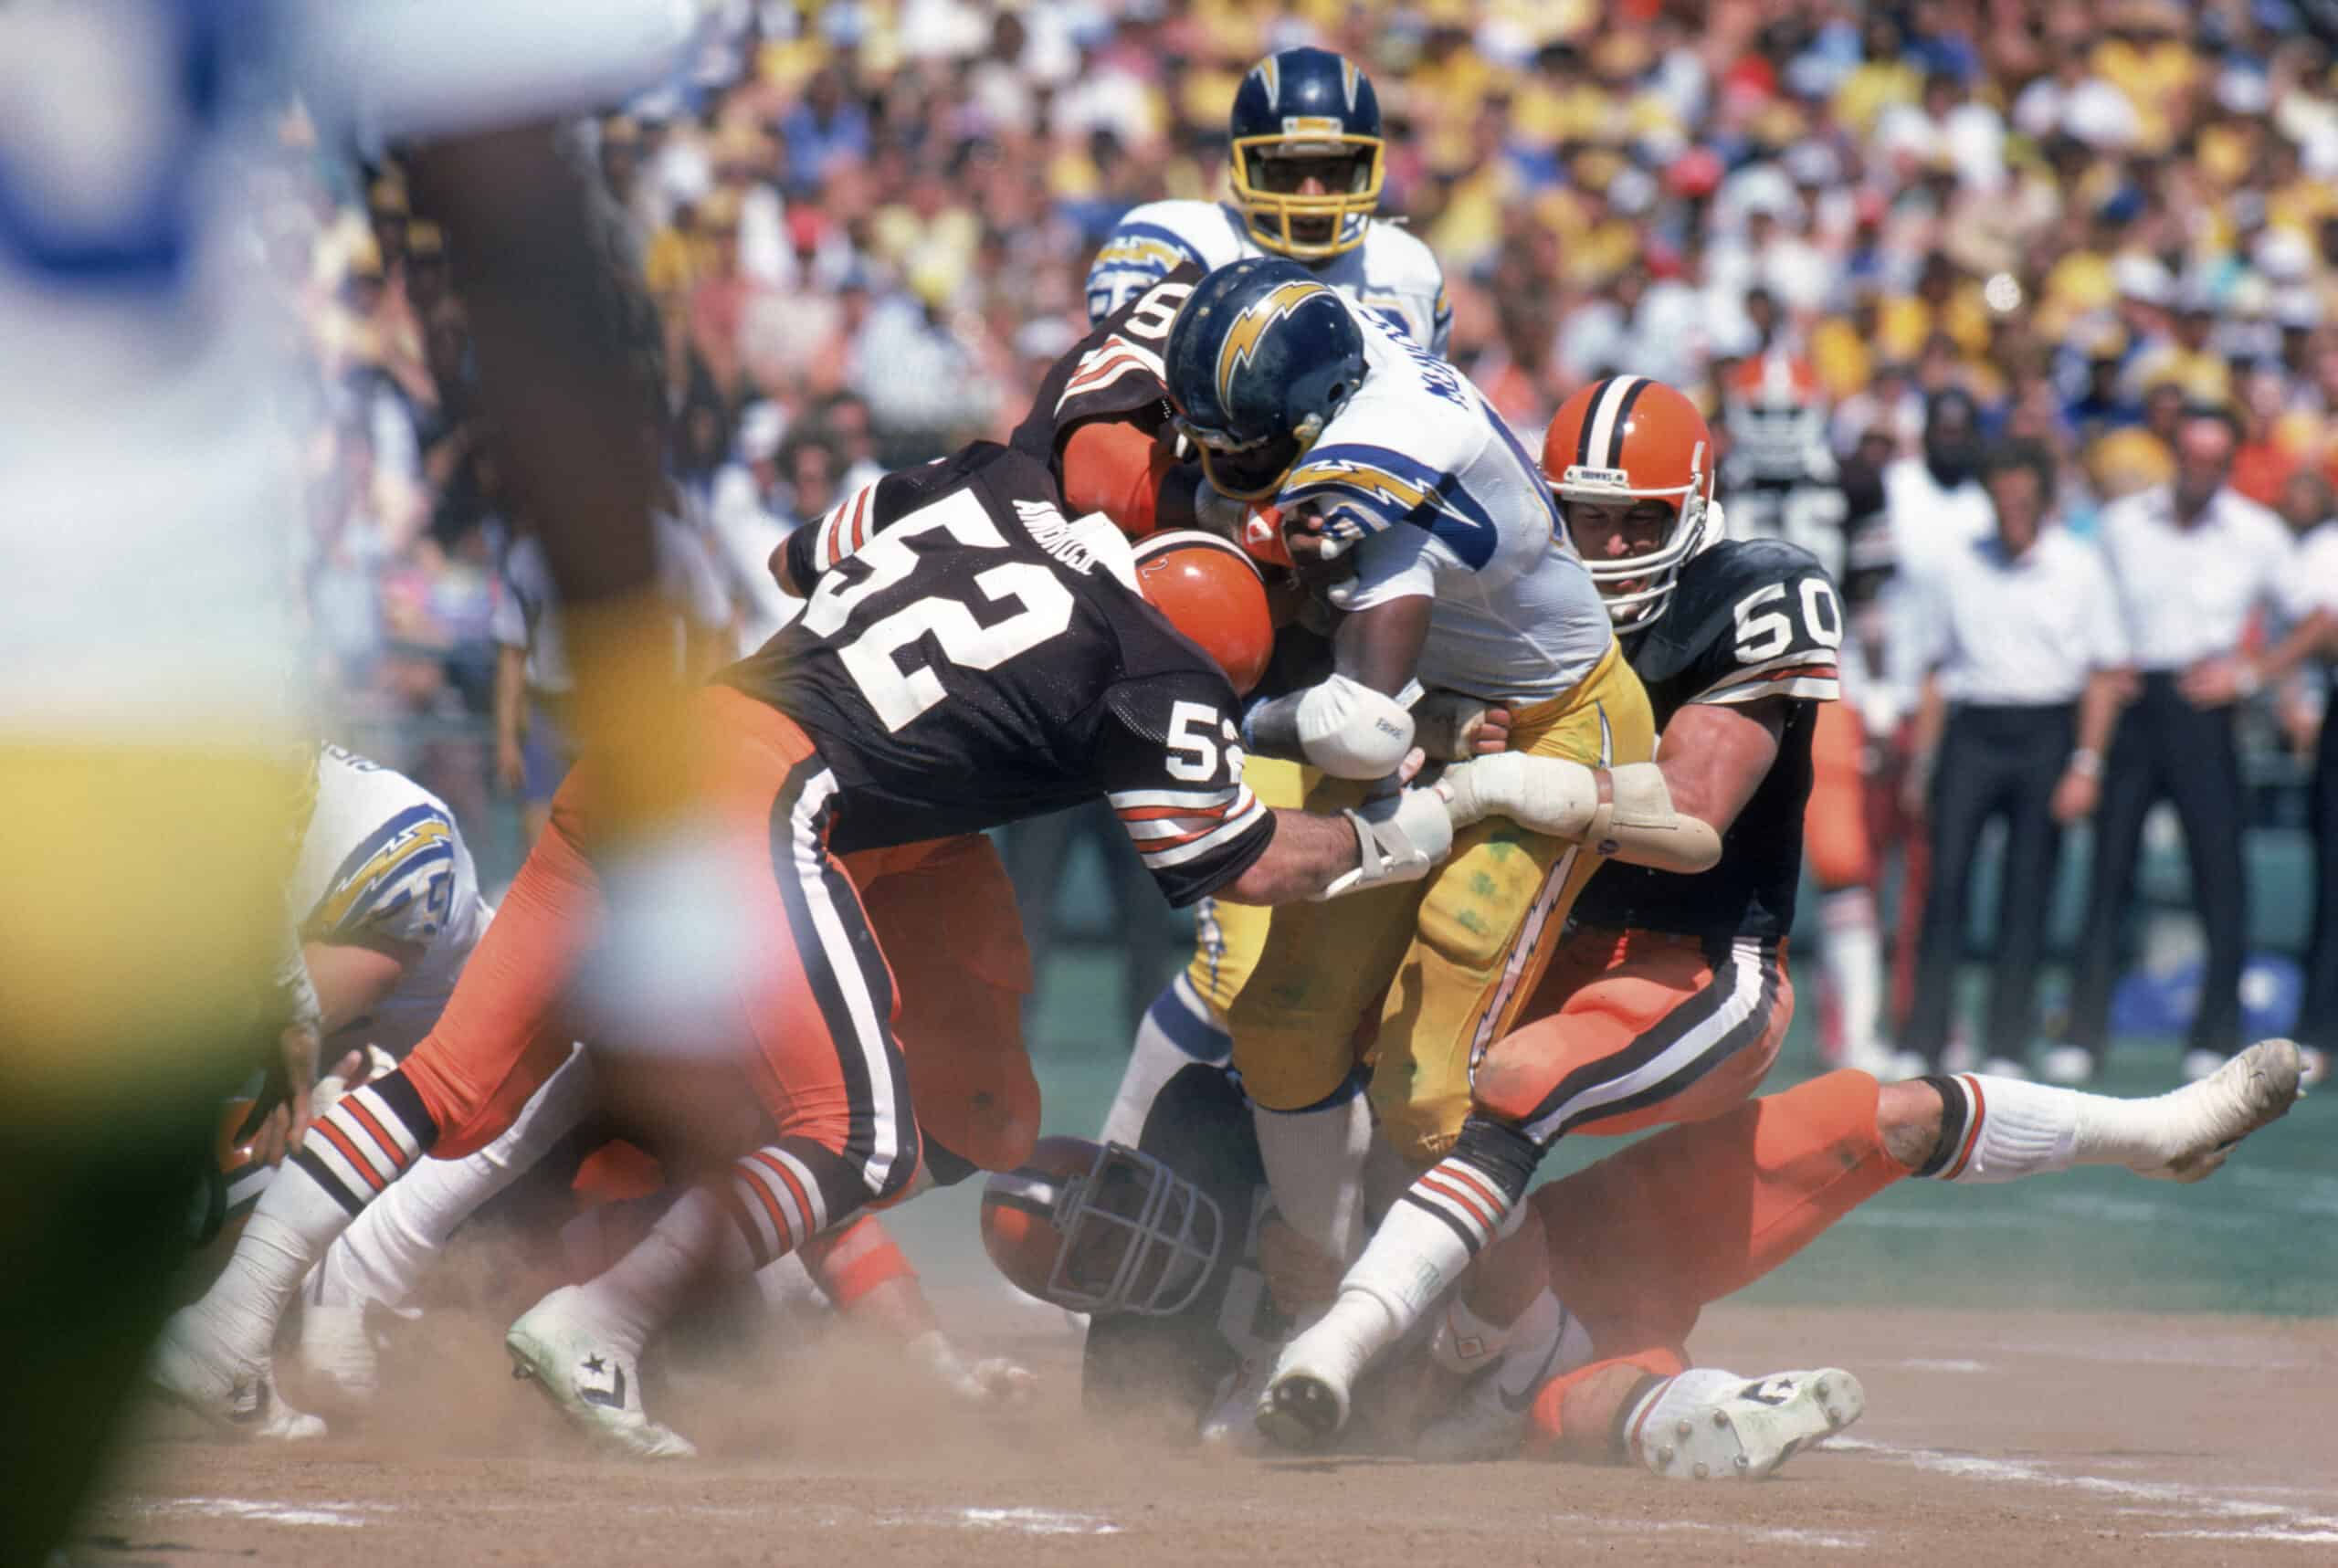 Linebackers Dick Ambrose #52 and Tom Cousineau #50 of the Cleveland Browns tackle running back Chuck Muncie #46 of the San Diego Chargers during a game at Jack Murphy Stadium on September 25, 1983 in San Diego, California. The Browns won 30-24 in overtime.